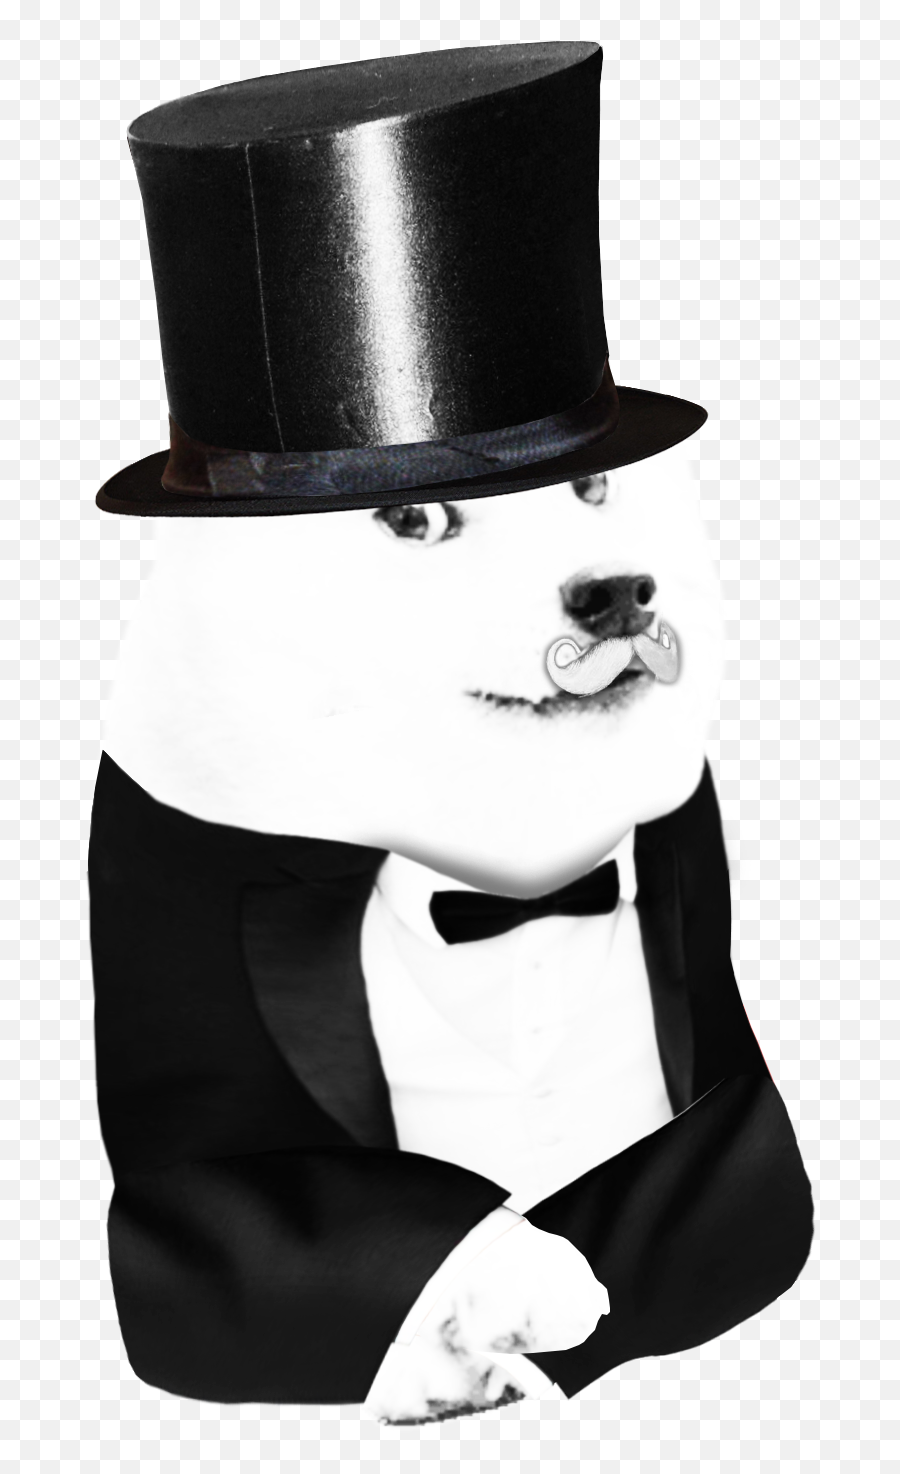 Dogelore - Doge Coin Monopoly Man Emoji,Monopoly Man Png